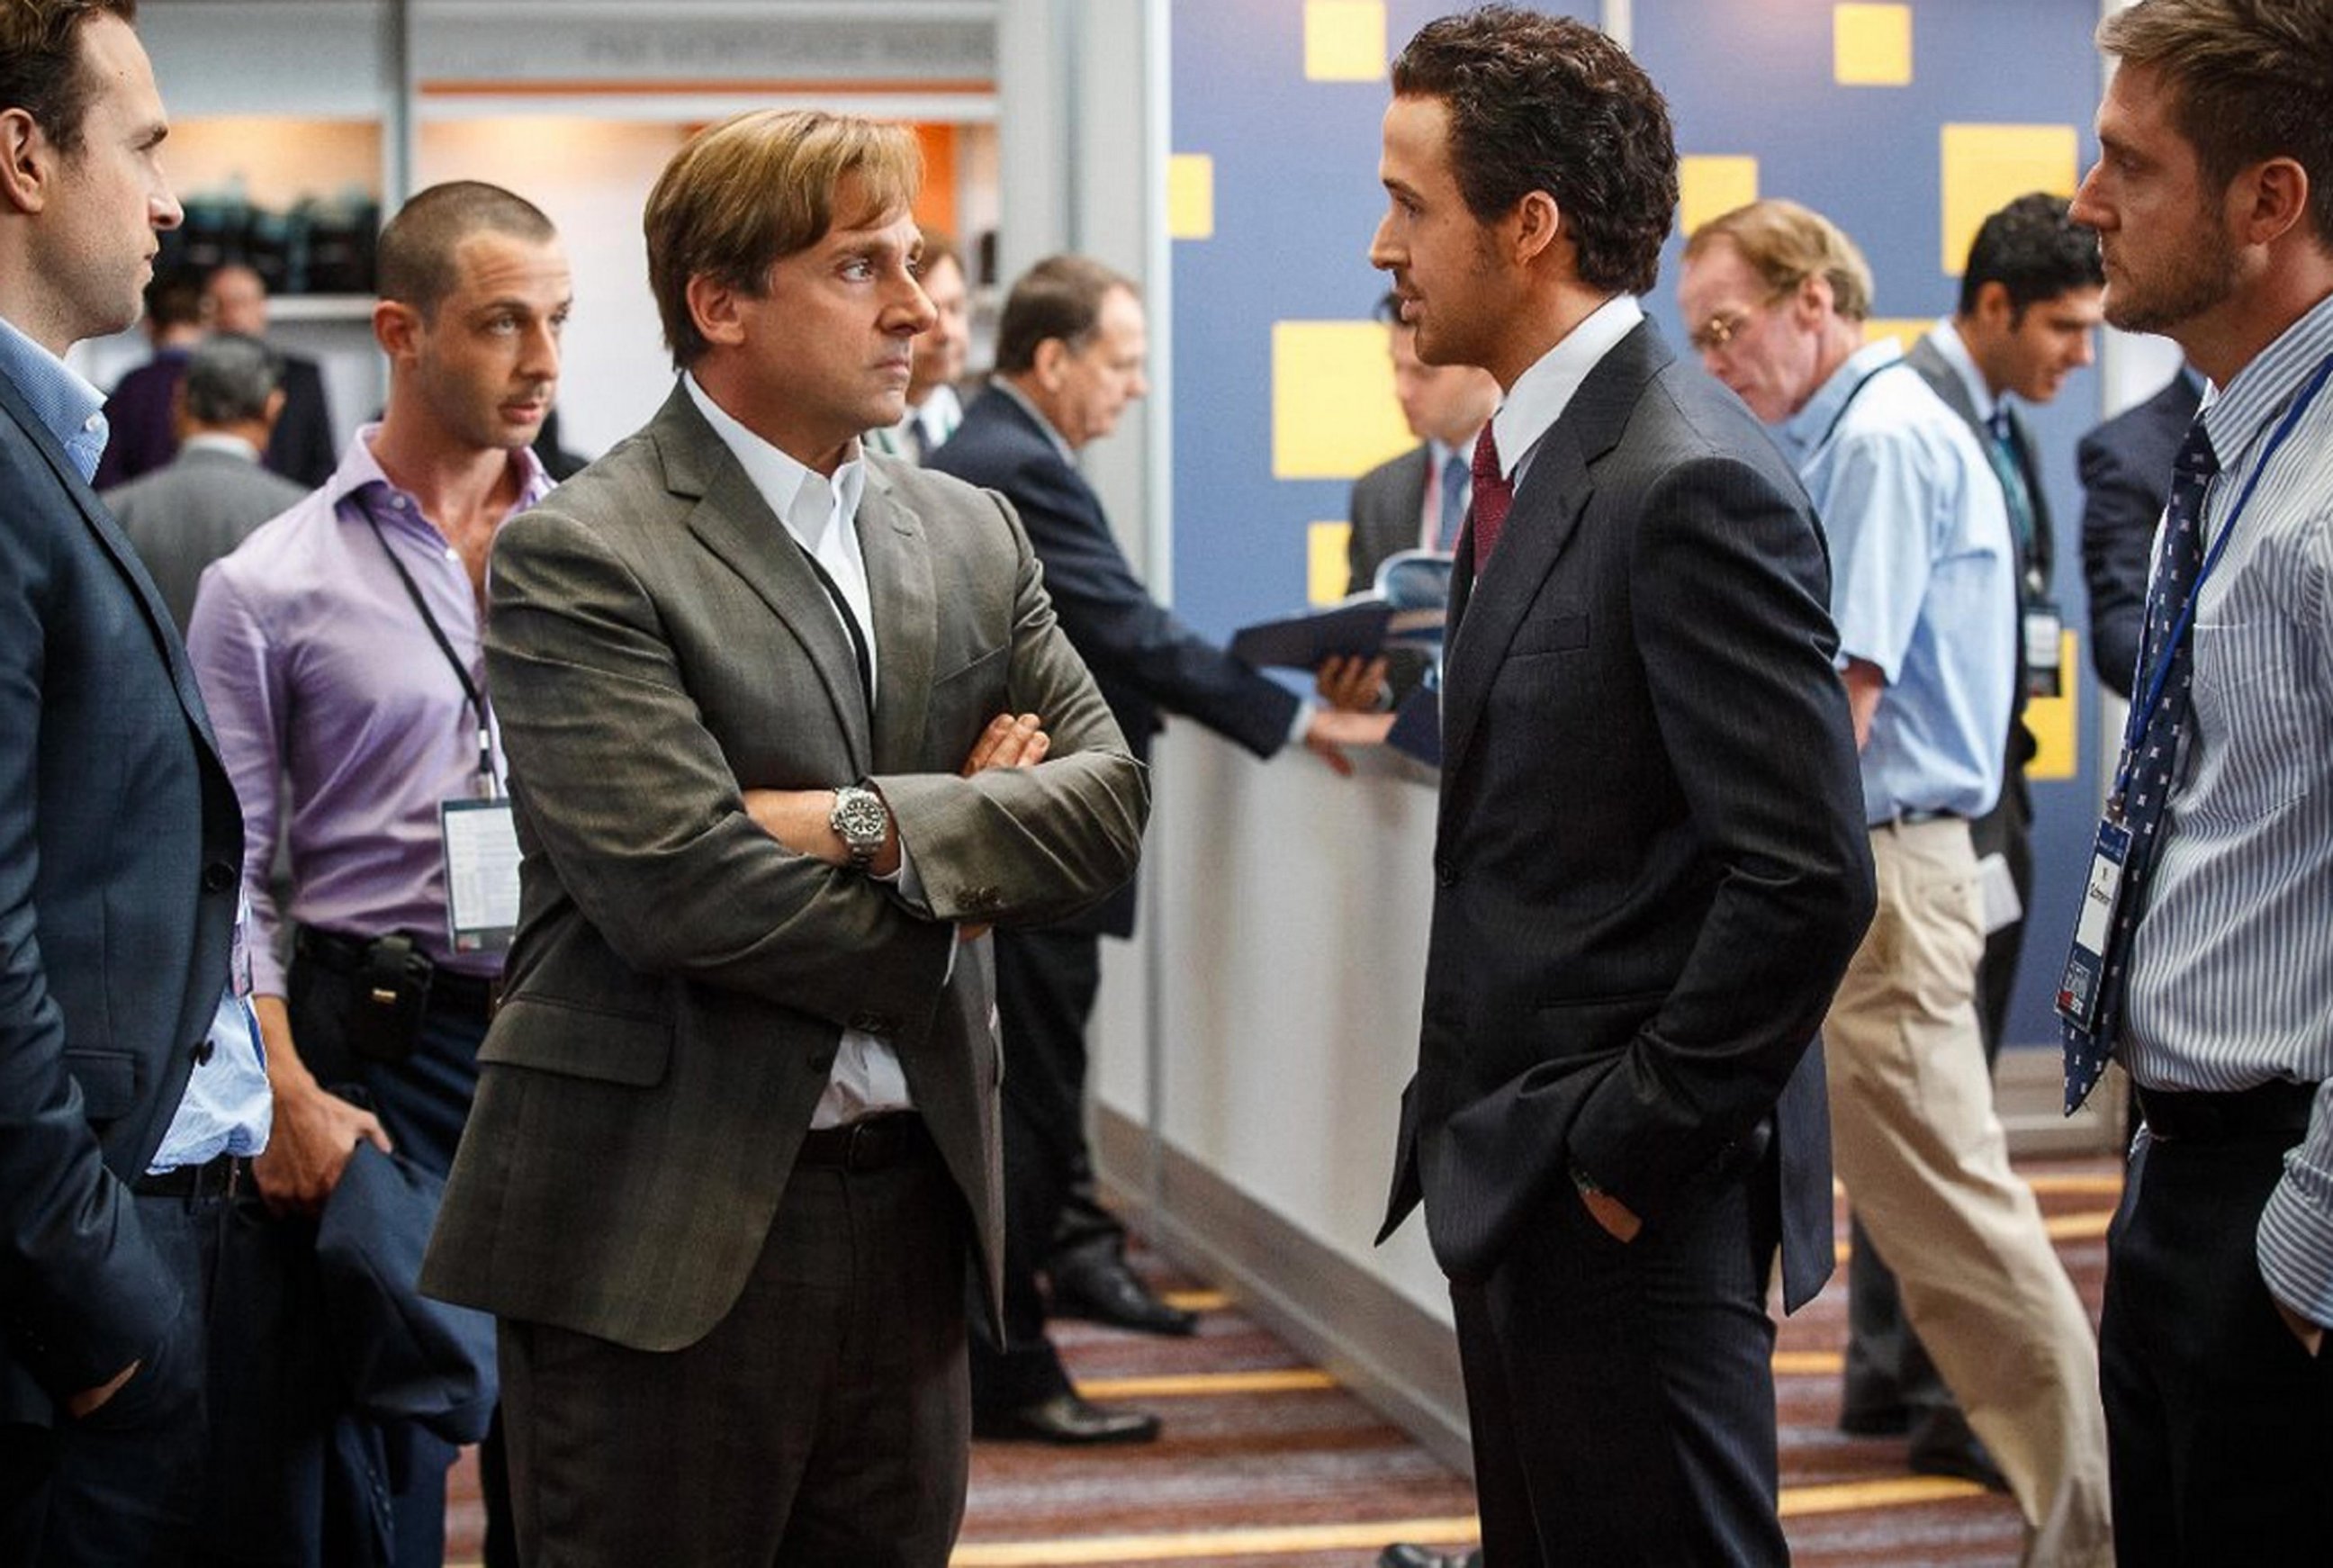 Ryan Gosling, right, on the set of The Big Short in this undated file photo.